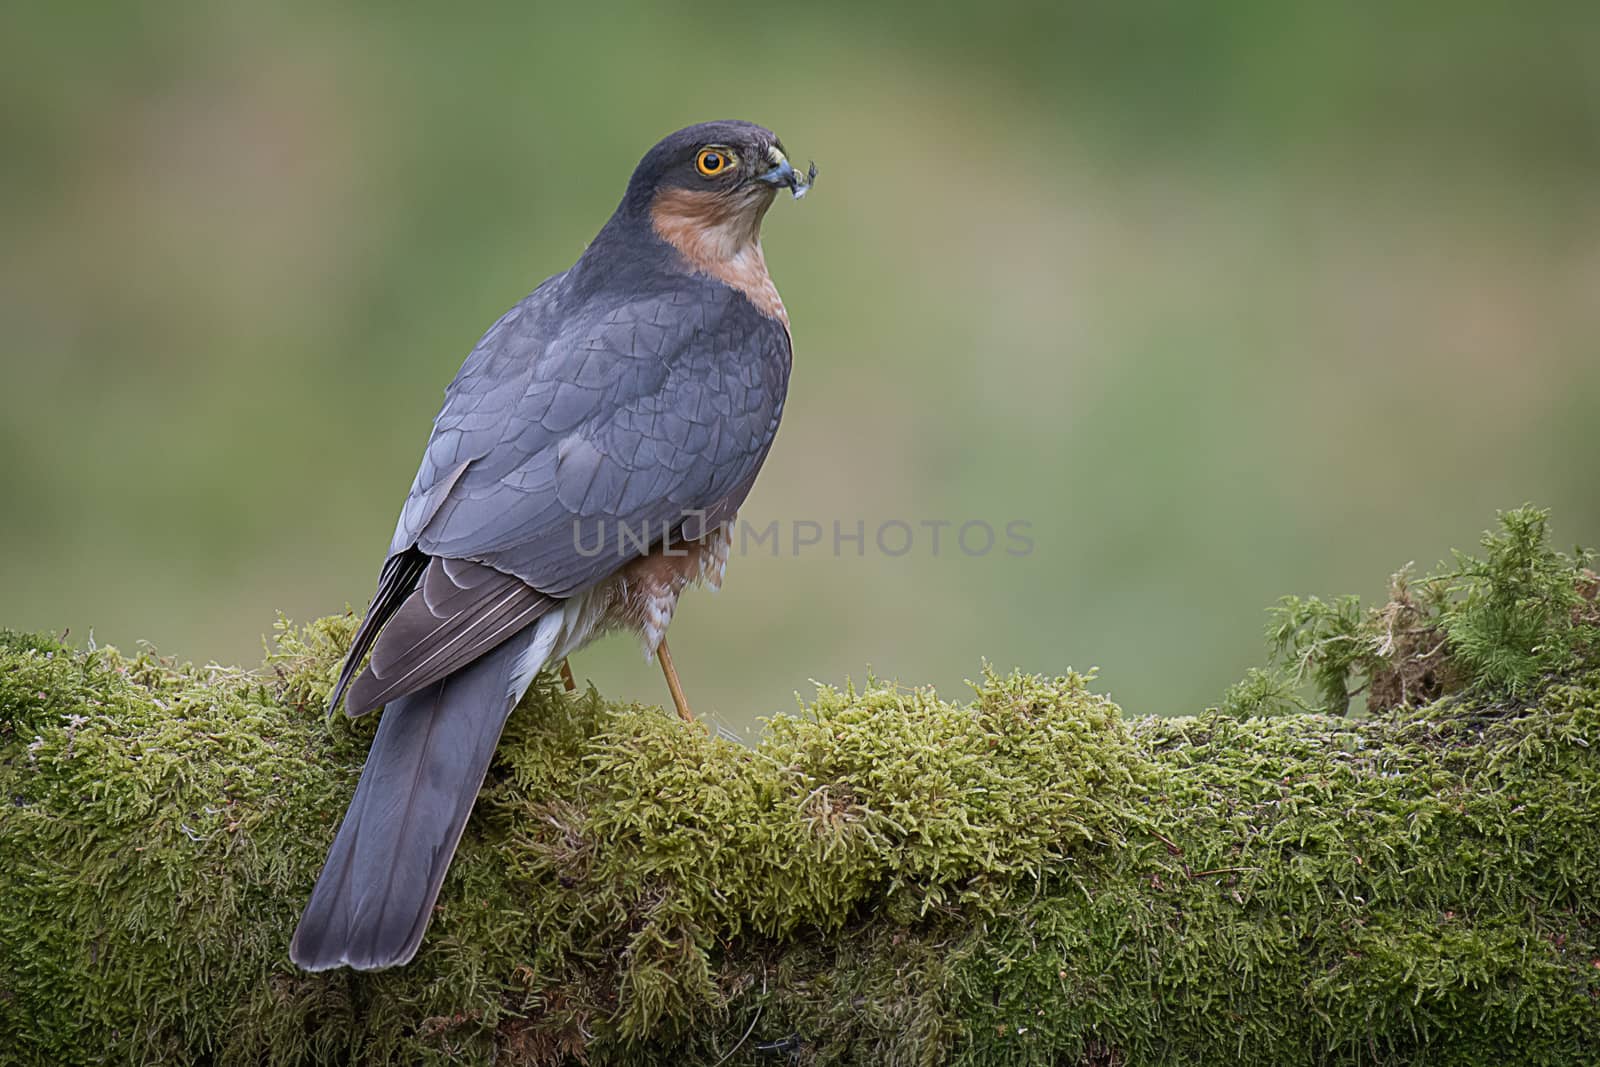 Portrait of a sparrowhawk by alan_tunnicliffe